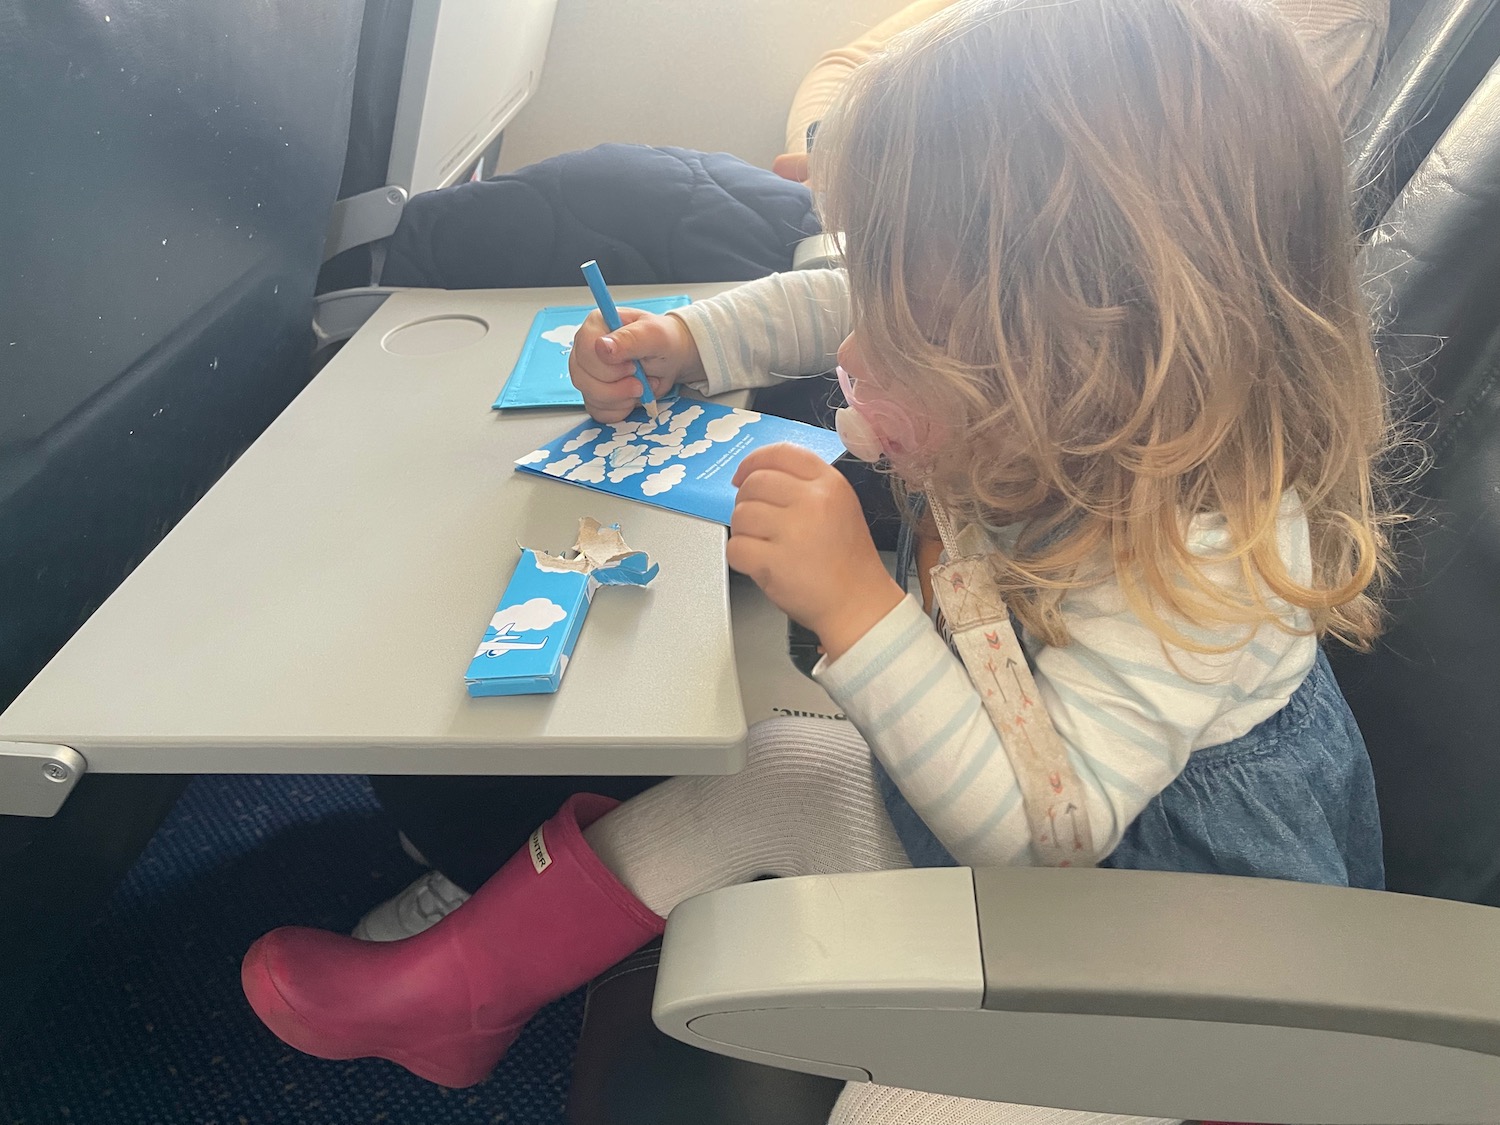 Bratty Kid Draws All Over Airplane With Her Marker. This Is Not Okay. -  Live and Let's Fly